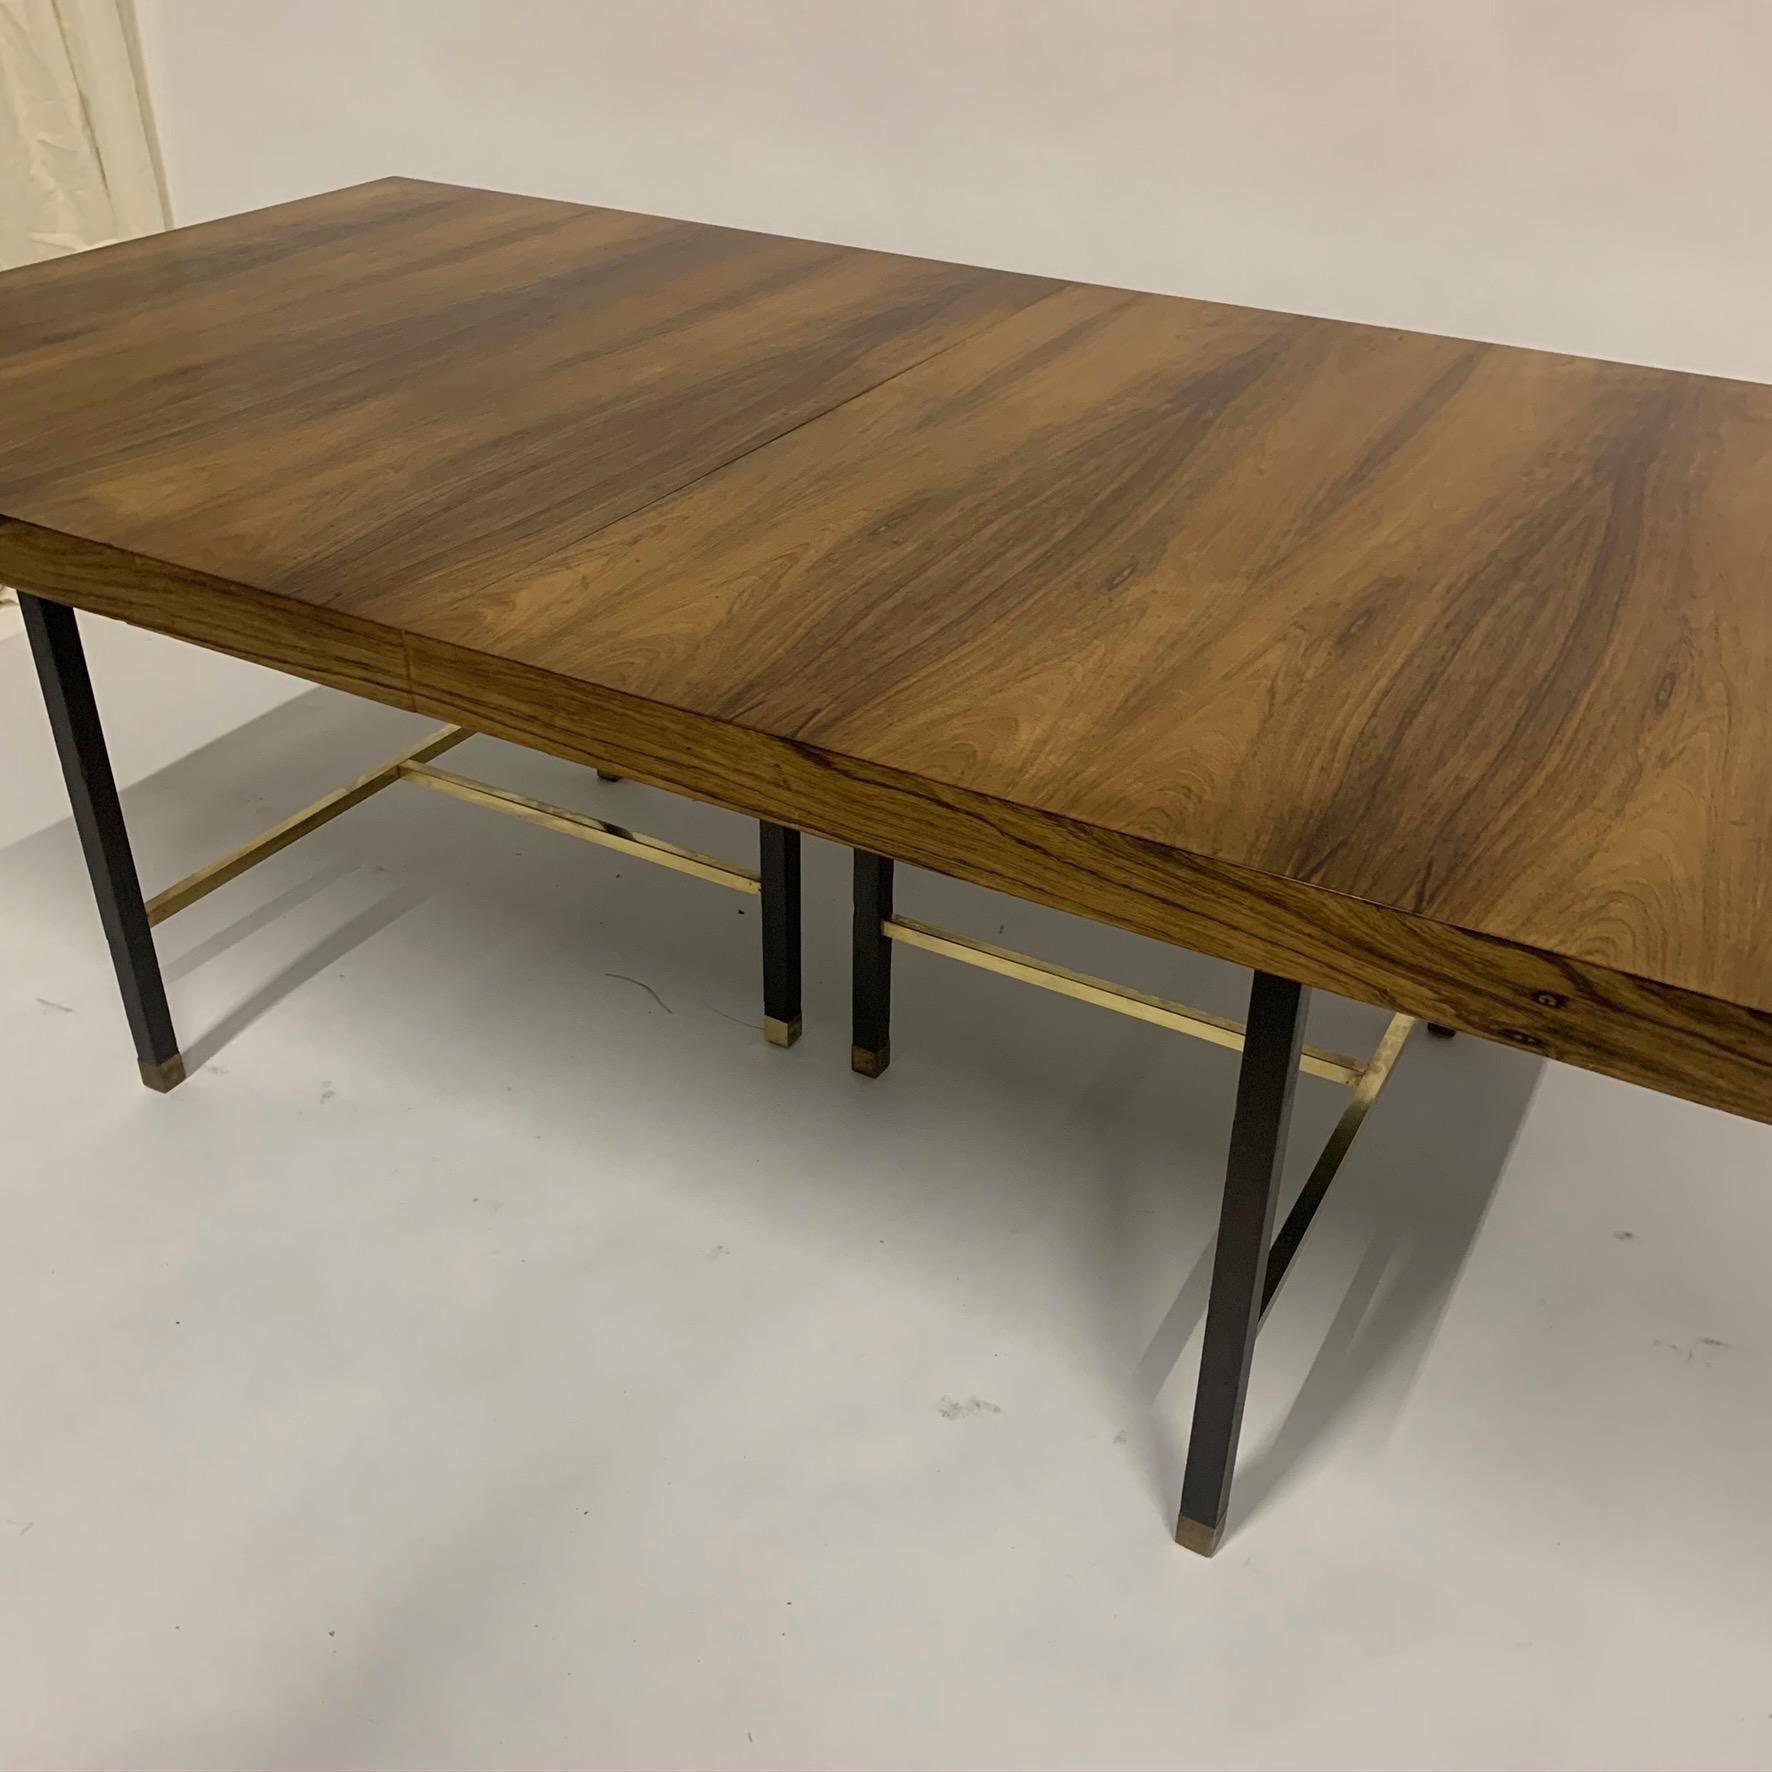 Stunning all original Harvey Probber dining table in Brazilian rosewood with brass stretchers and feet, and mahogany base/ legs. Comes with 2 additional leaves. Each leaf is 16